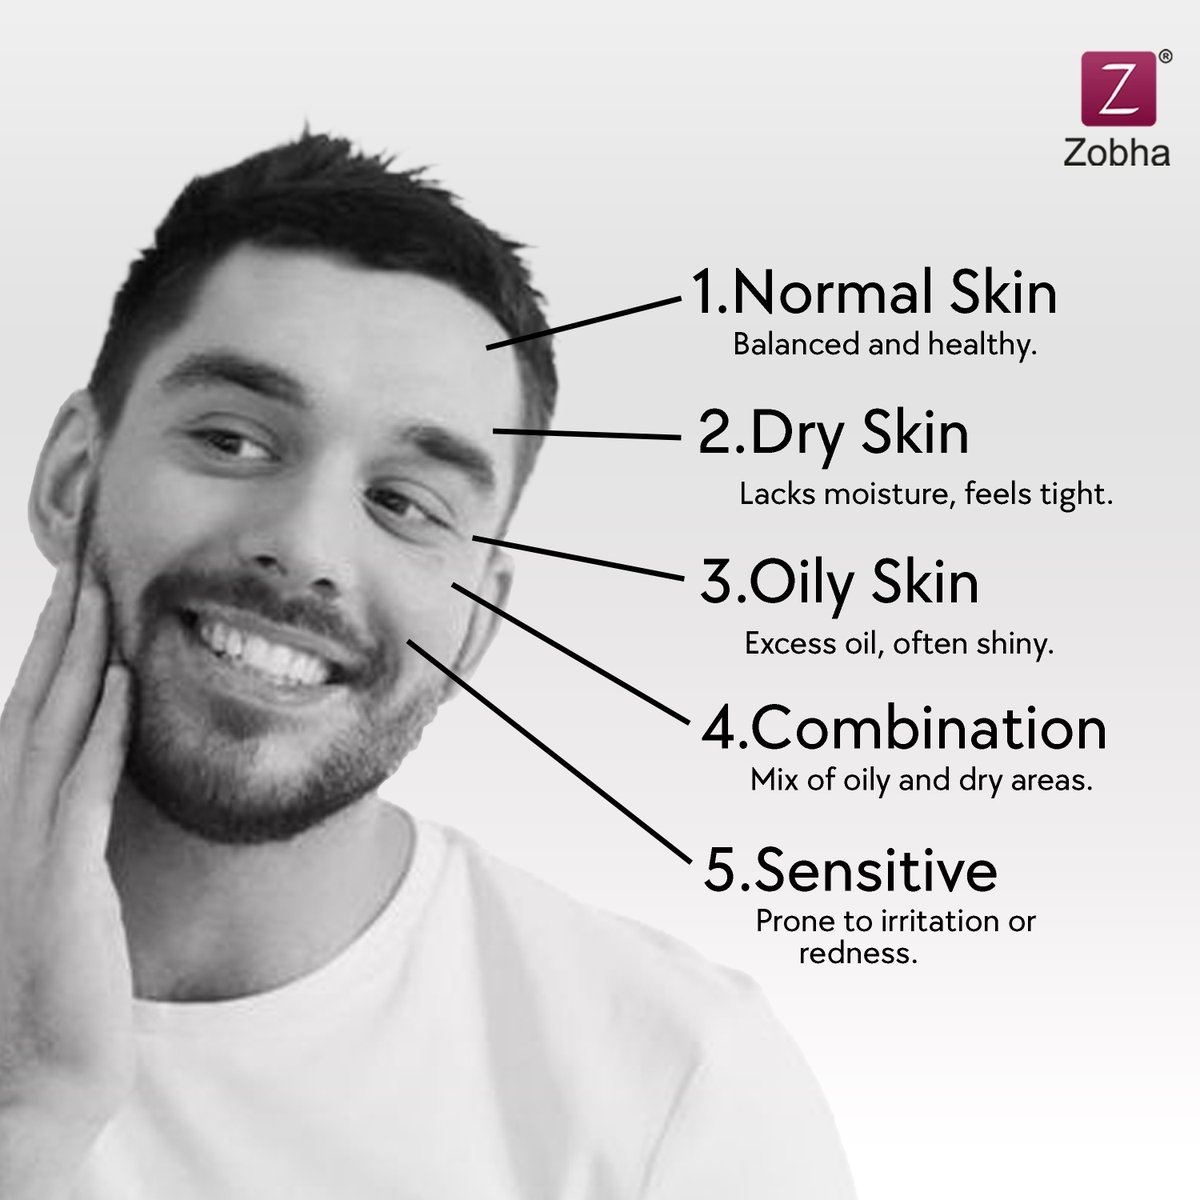 'Attention gentlemen: Just like fine-tuning a machine, knowing your skin type is key to optimal grooming! 🧔✨ From oily to sensitive, men's skin comes in all varieties too.

#KnowYourSkin #MensSkincare #Zobha #skinfacts #mensskincare #skincaretips #skintypes